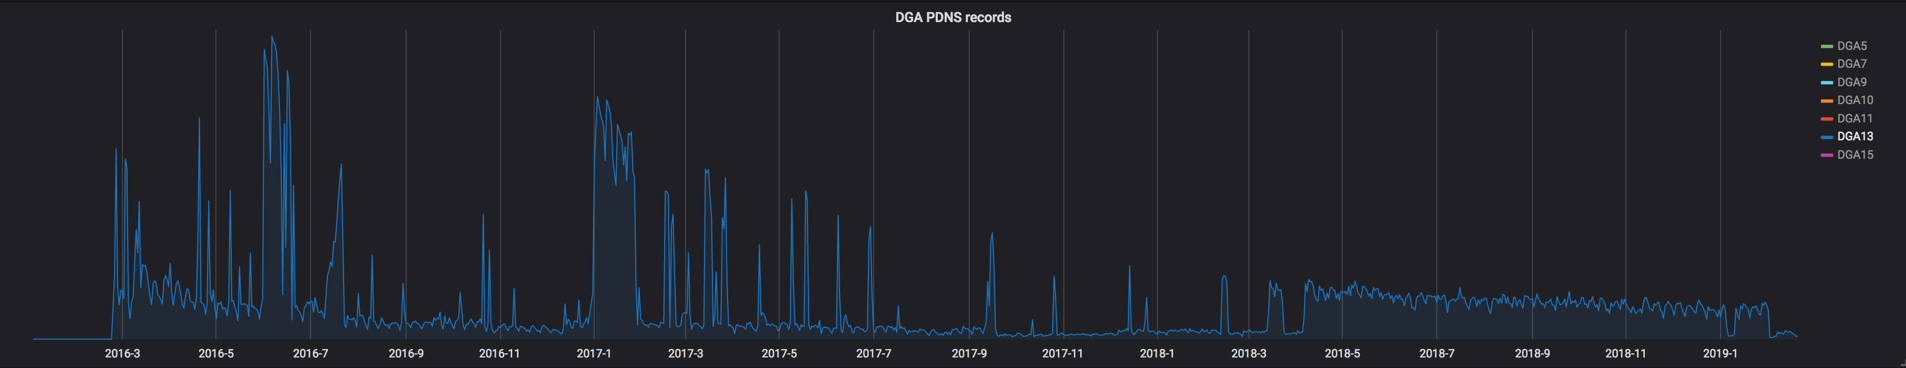 Picture3_ DGA PDNS Records.png